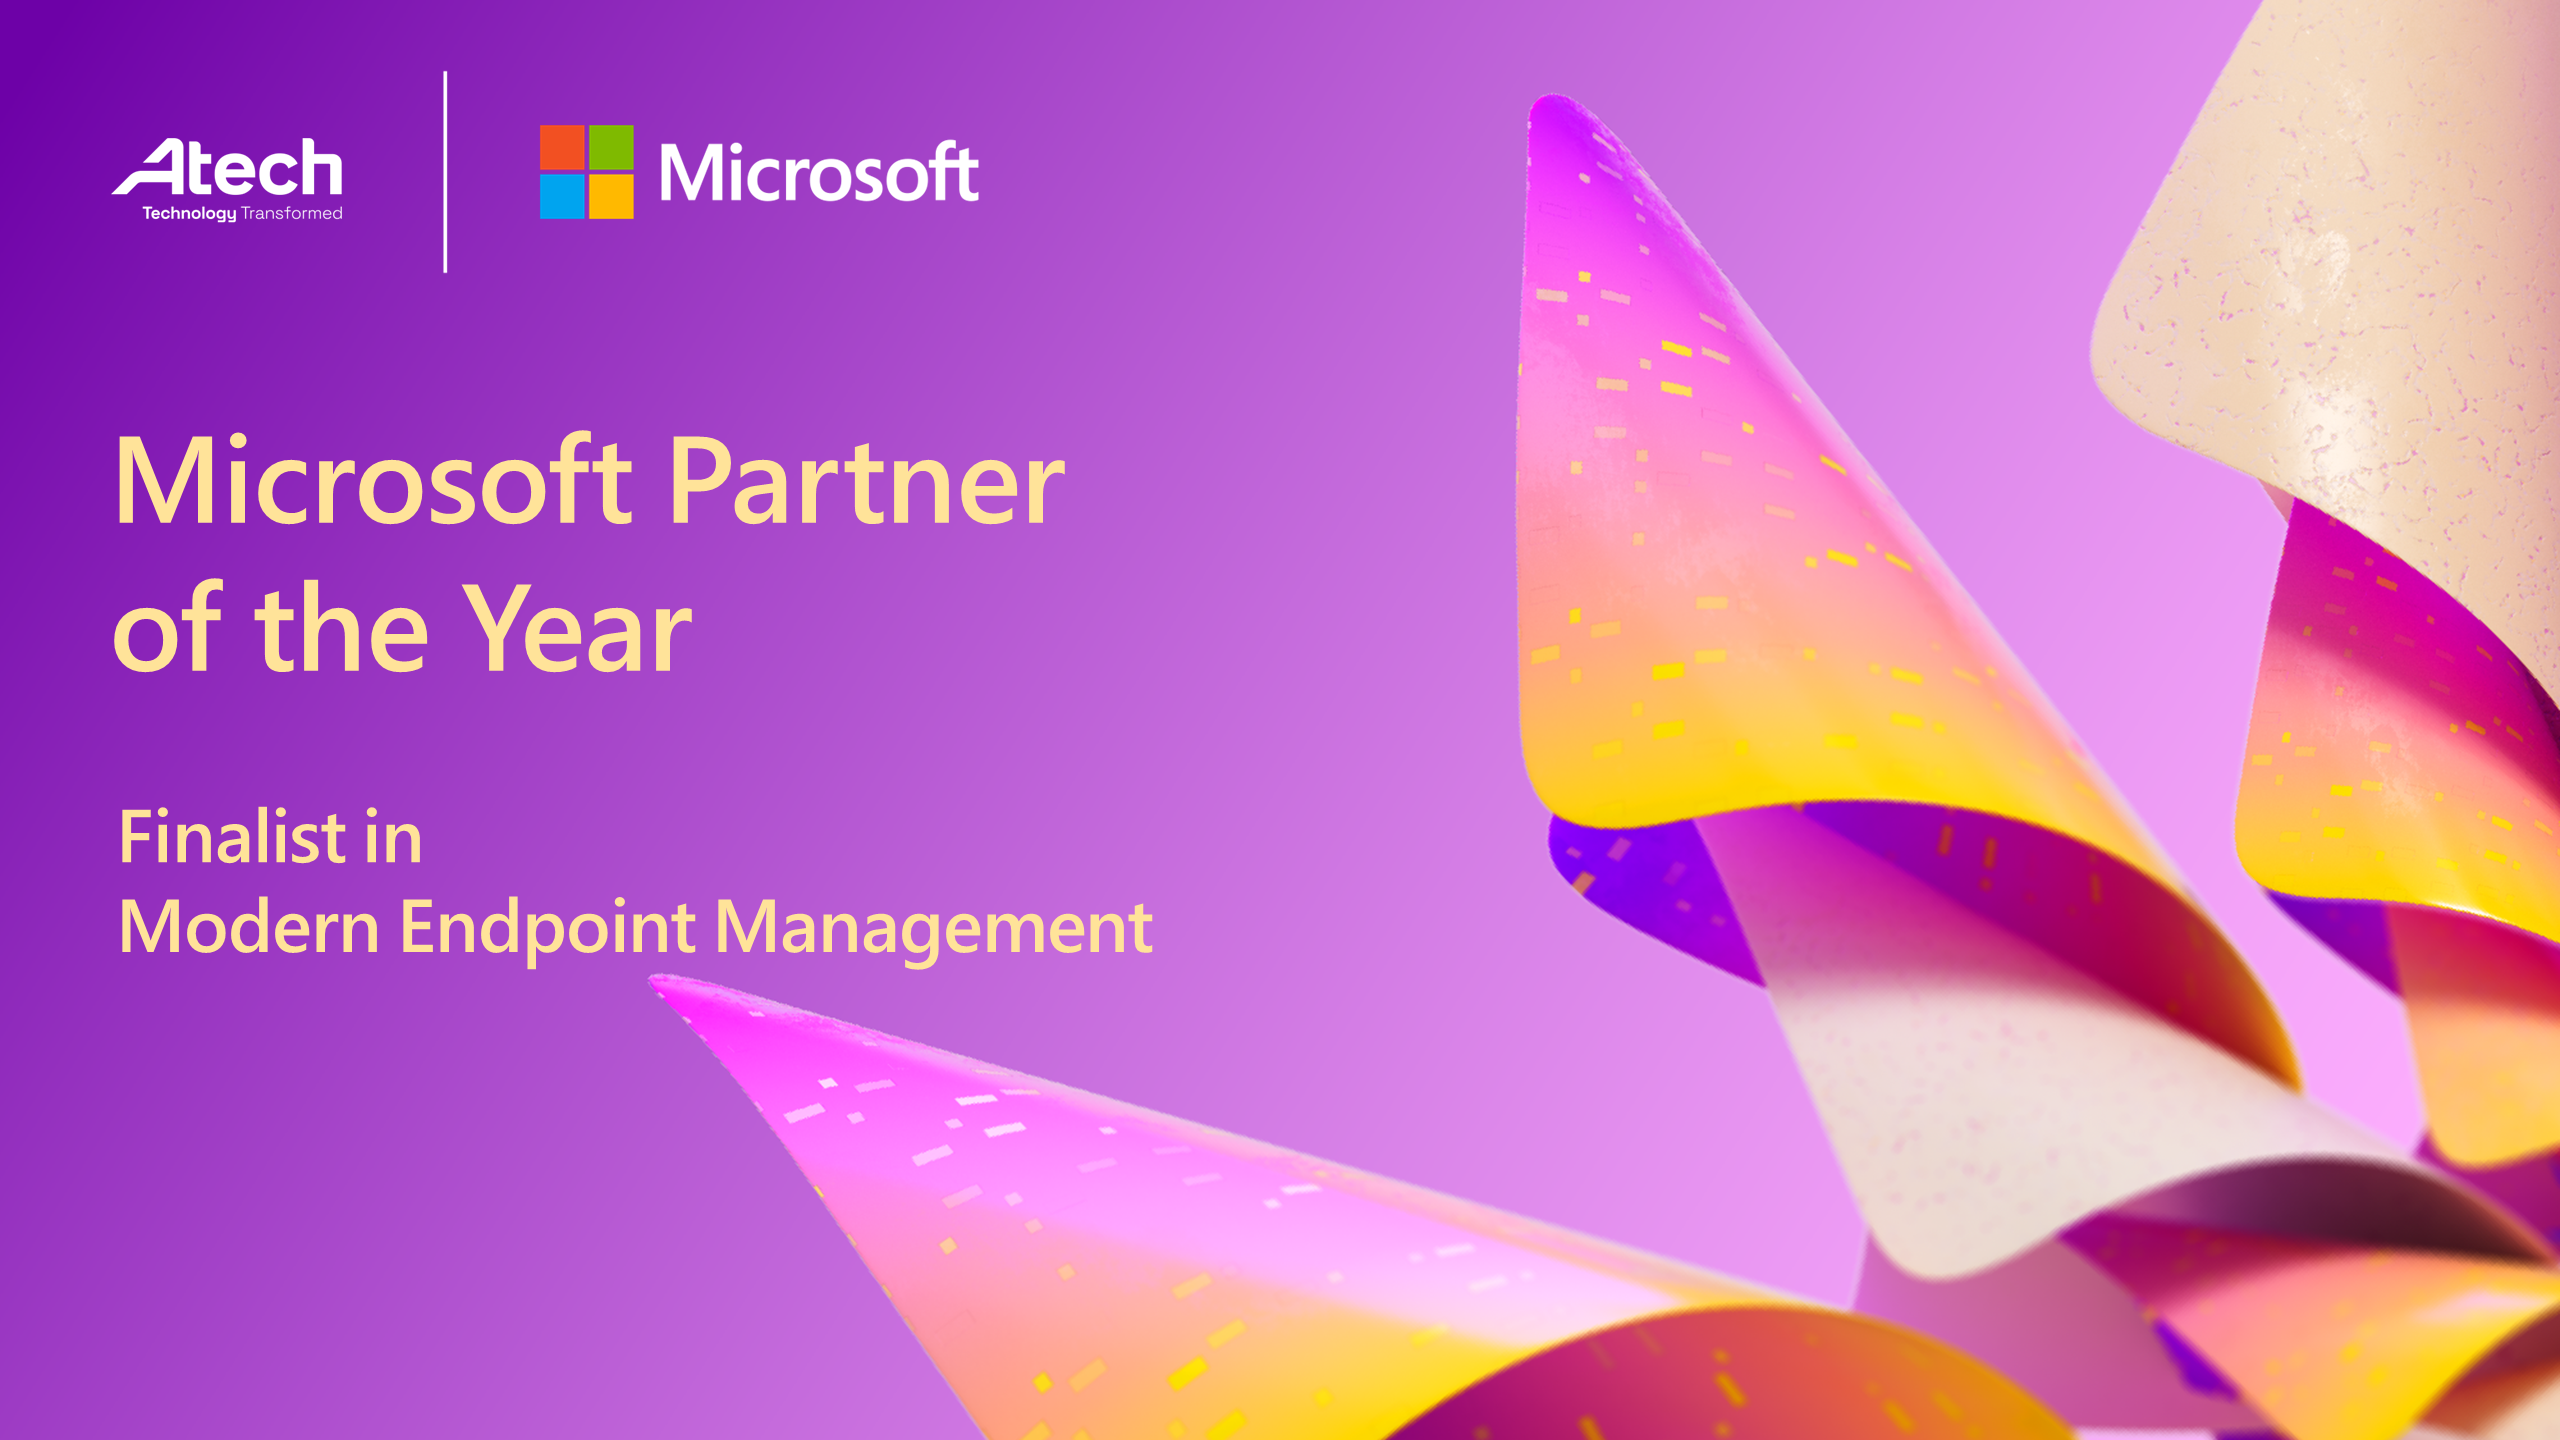 Atech recognised as a finalist of 2022 Microsoft Partner of the Year